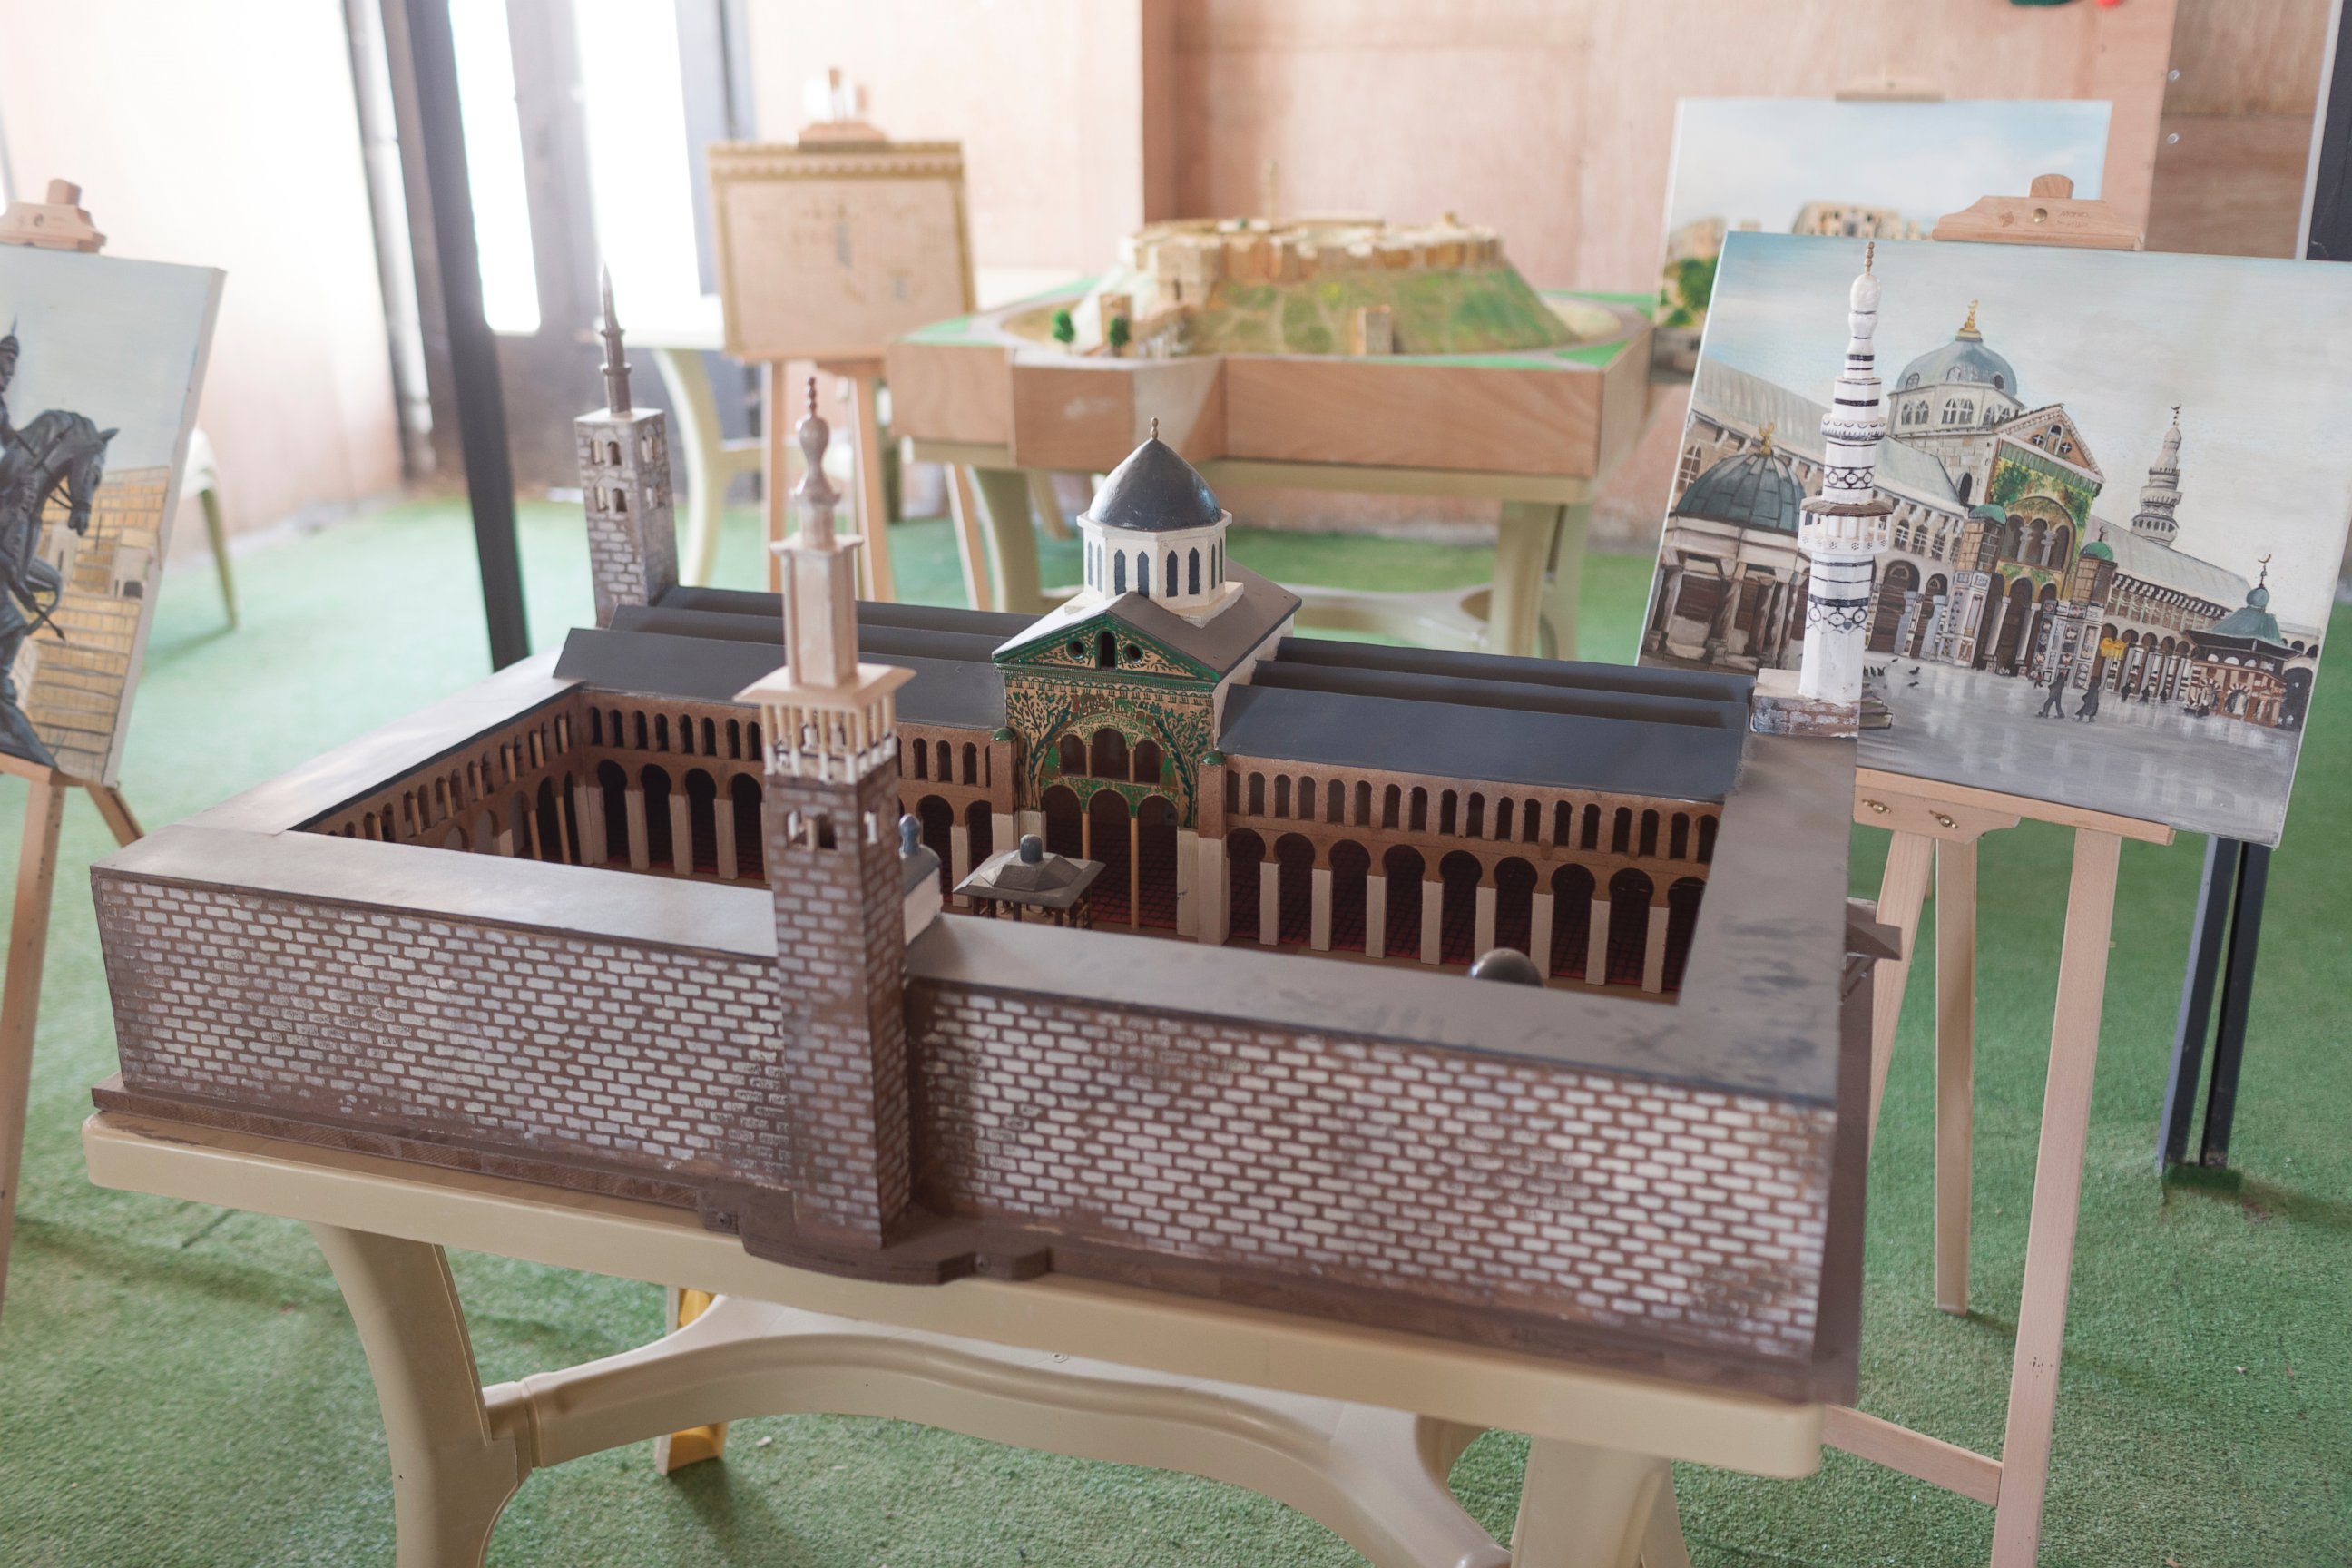 PHOTO: Damascus's Umayyad Mosque is one of the miniature replicas displayed at the community centre.